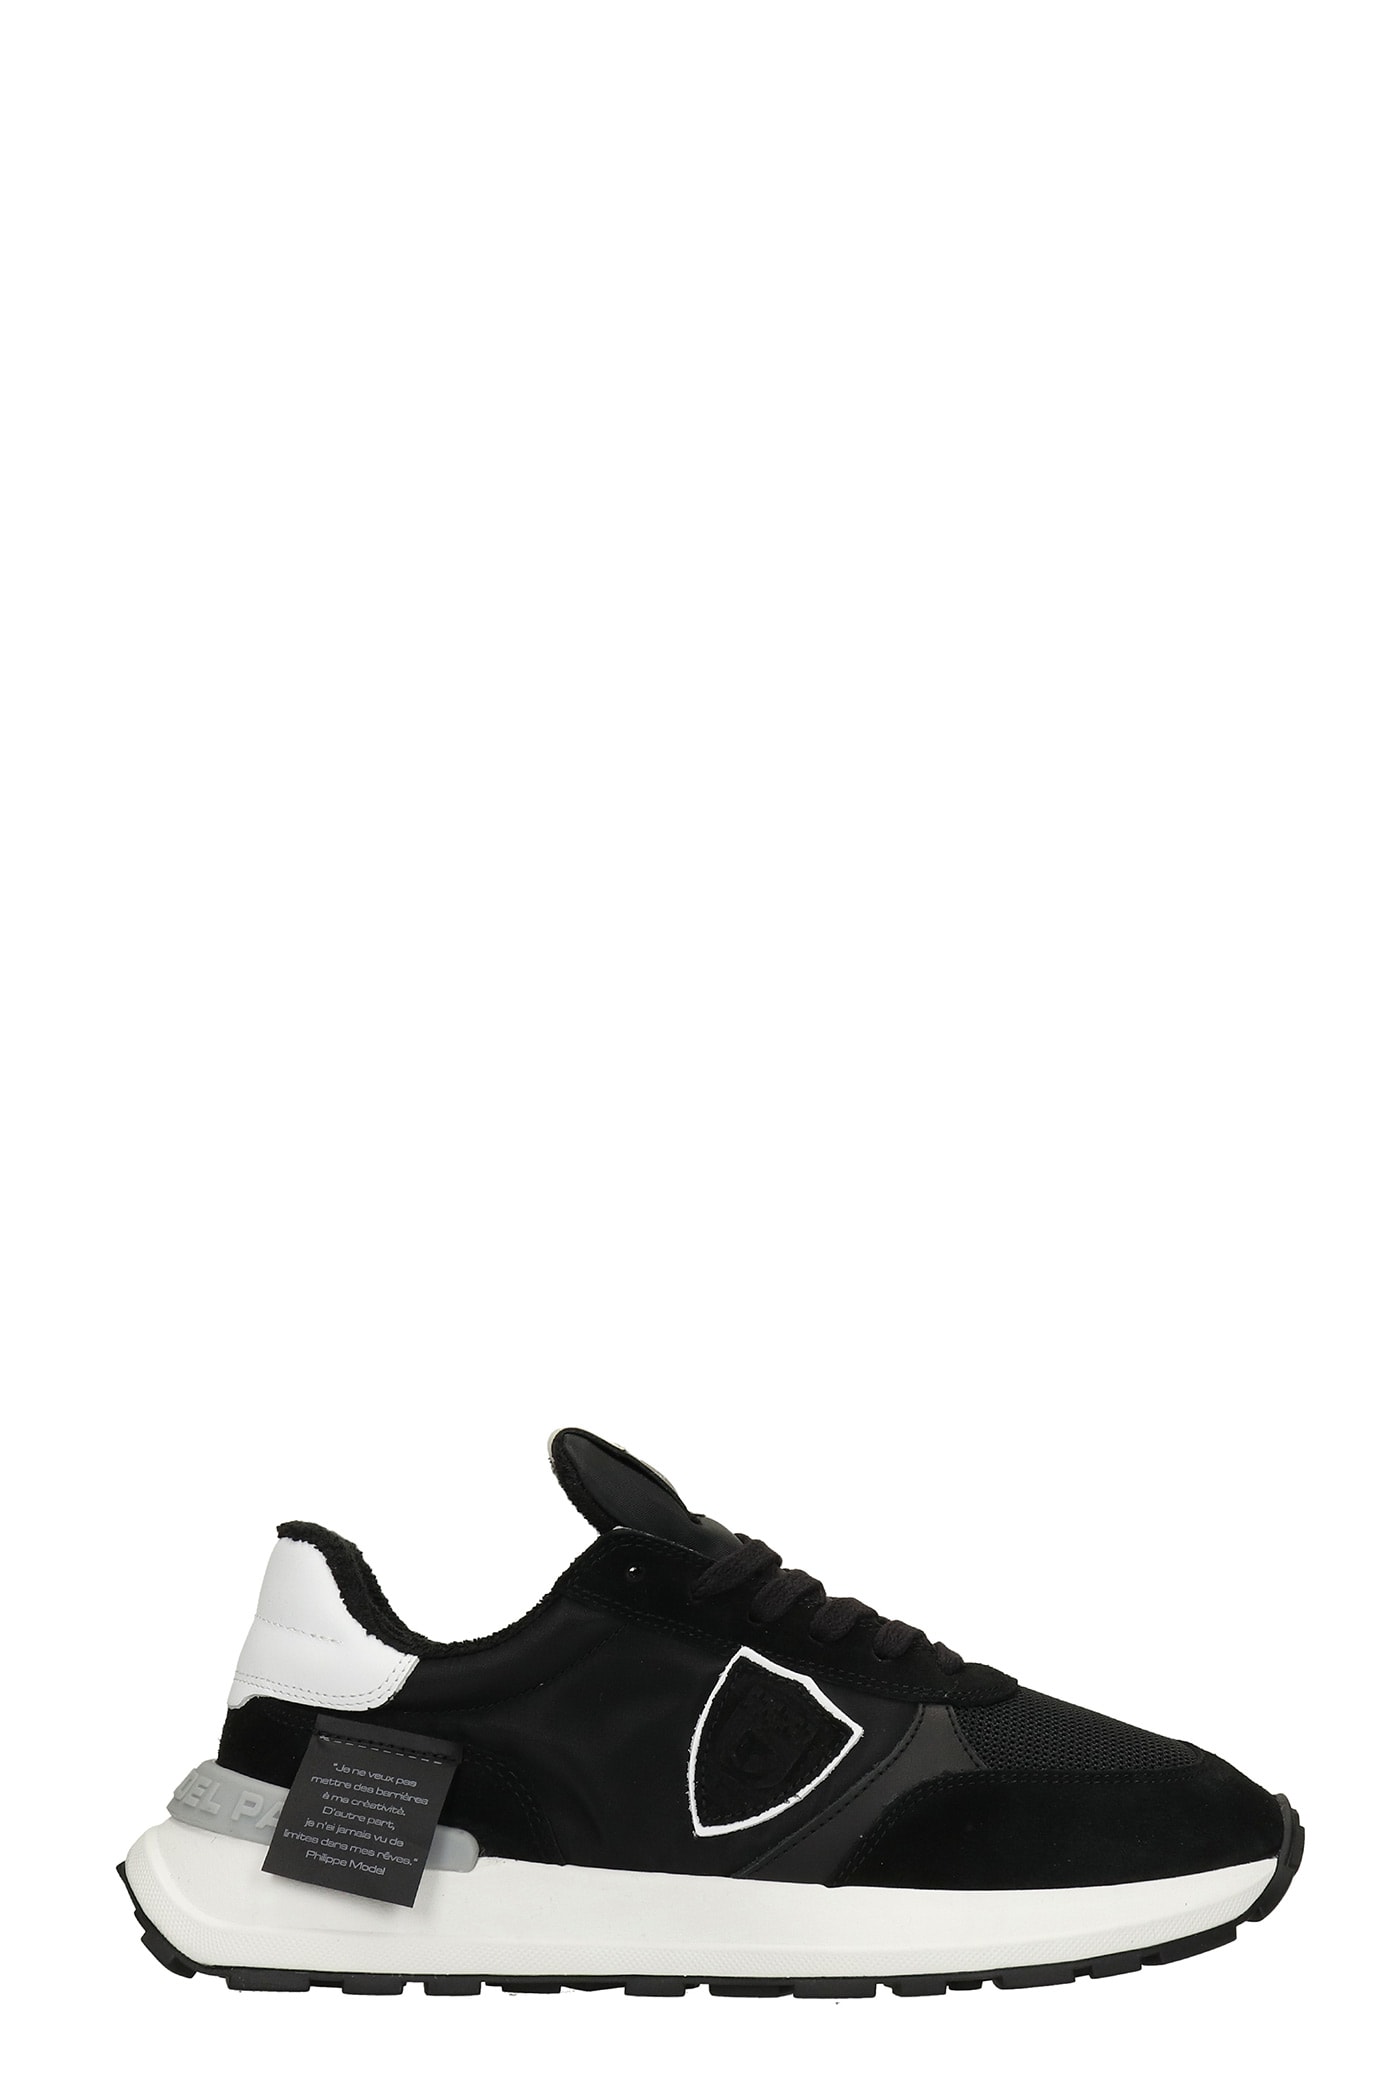 Philippe Model Antibes Sneakers In Black Suede And Fabric